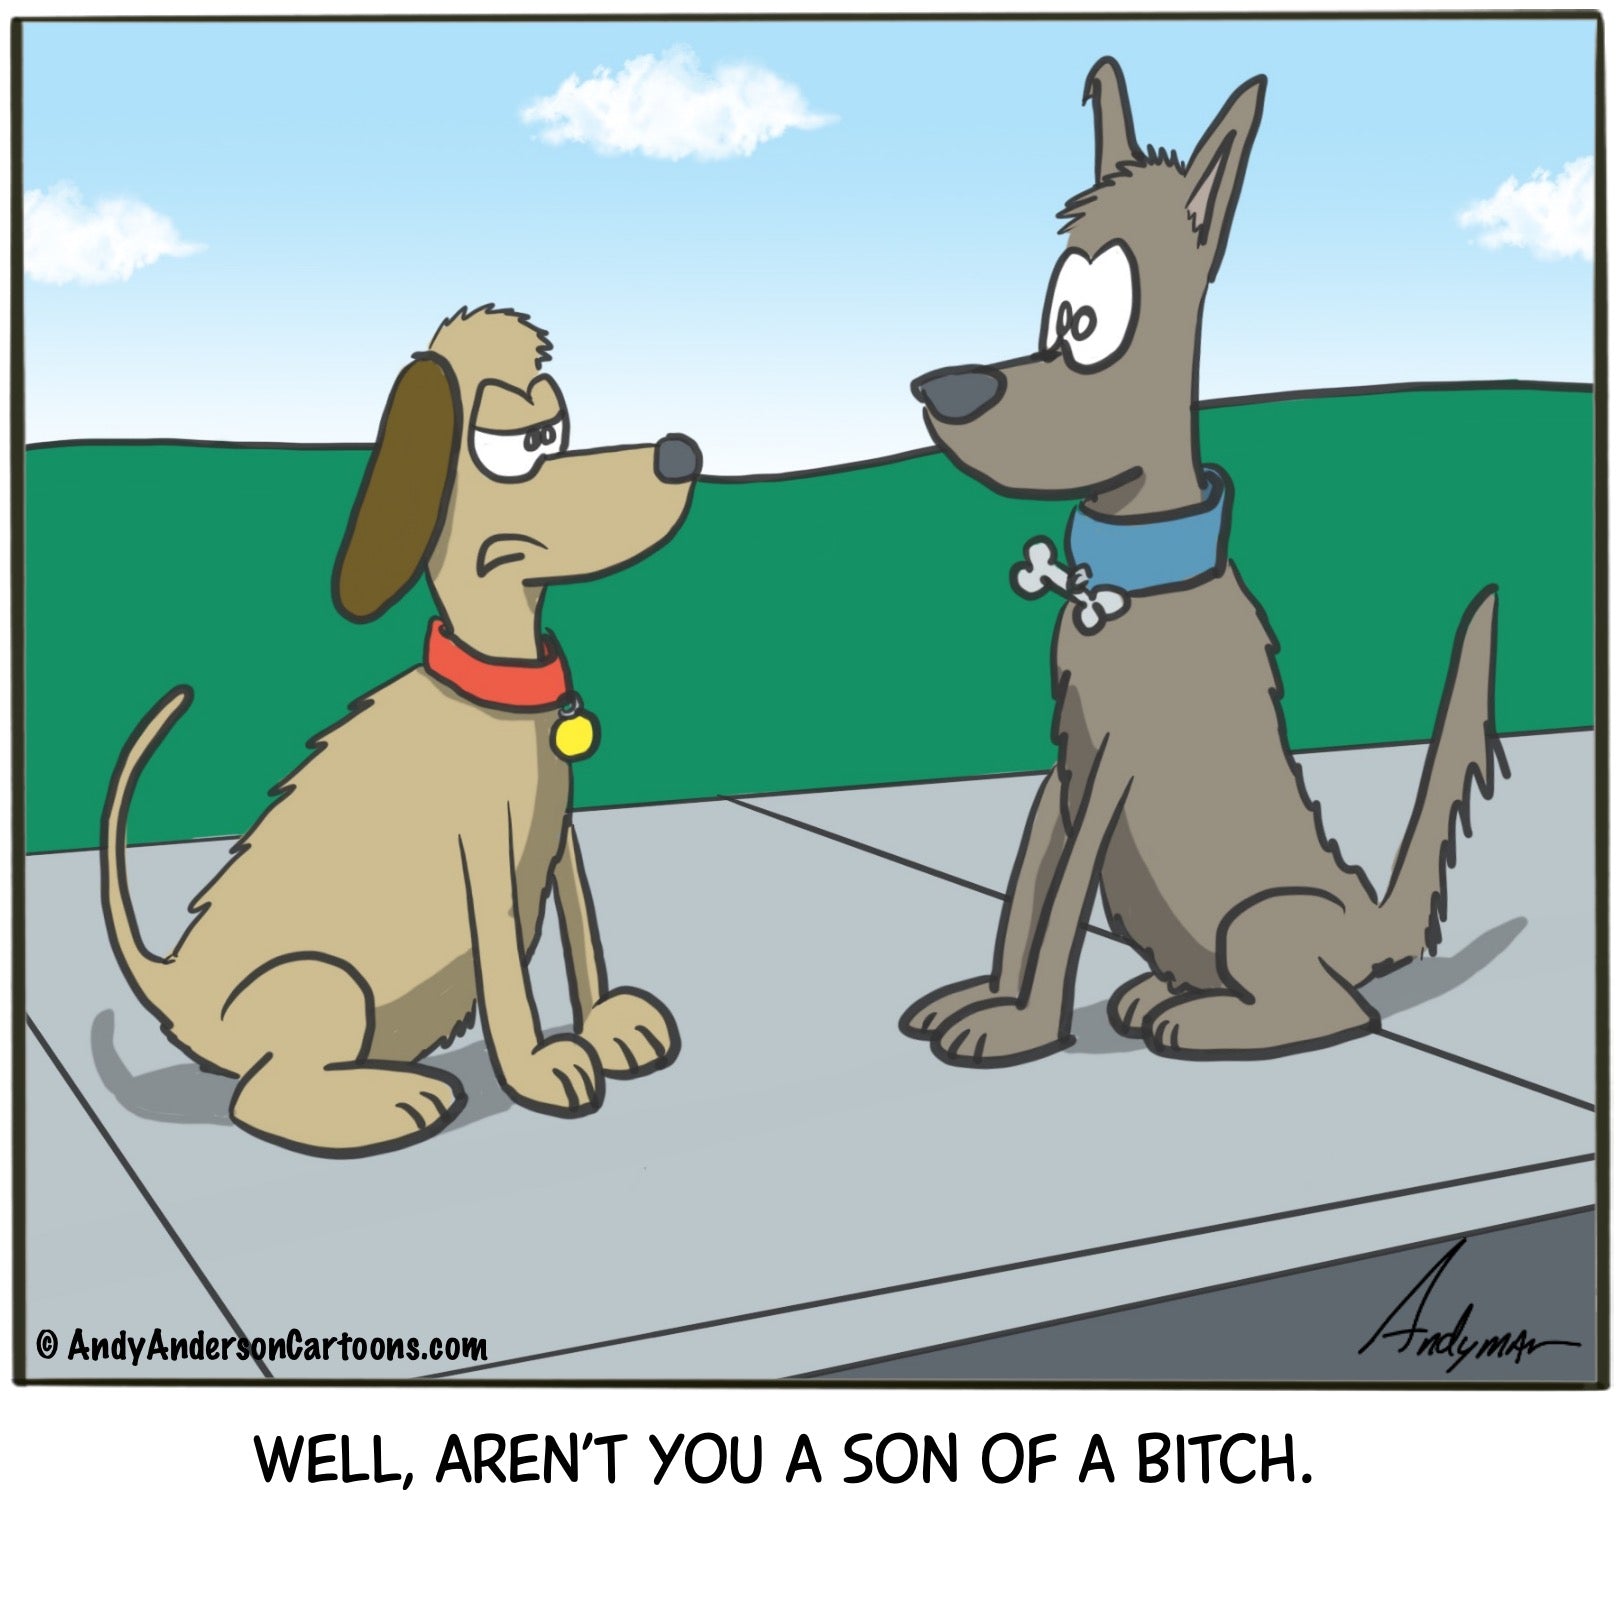 Cartoon about one dog calling another dog a "son of a bitch"